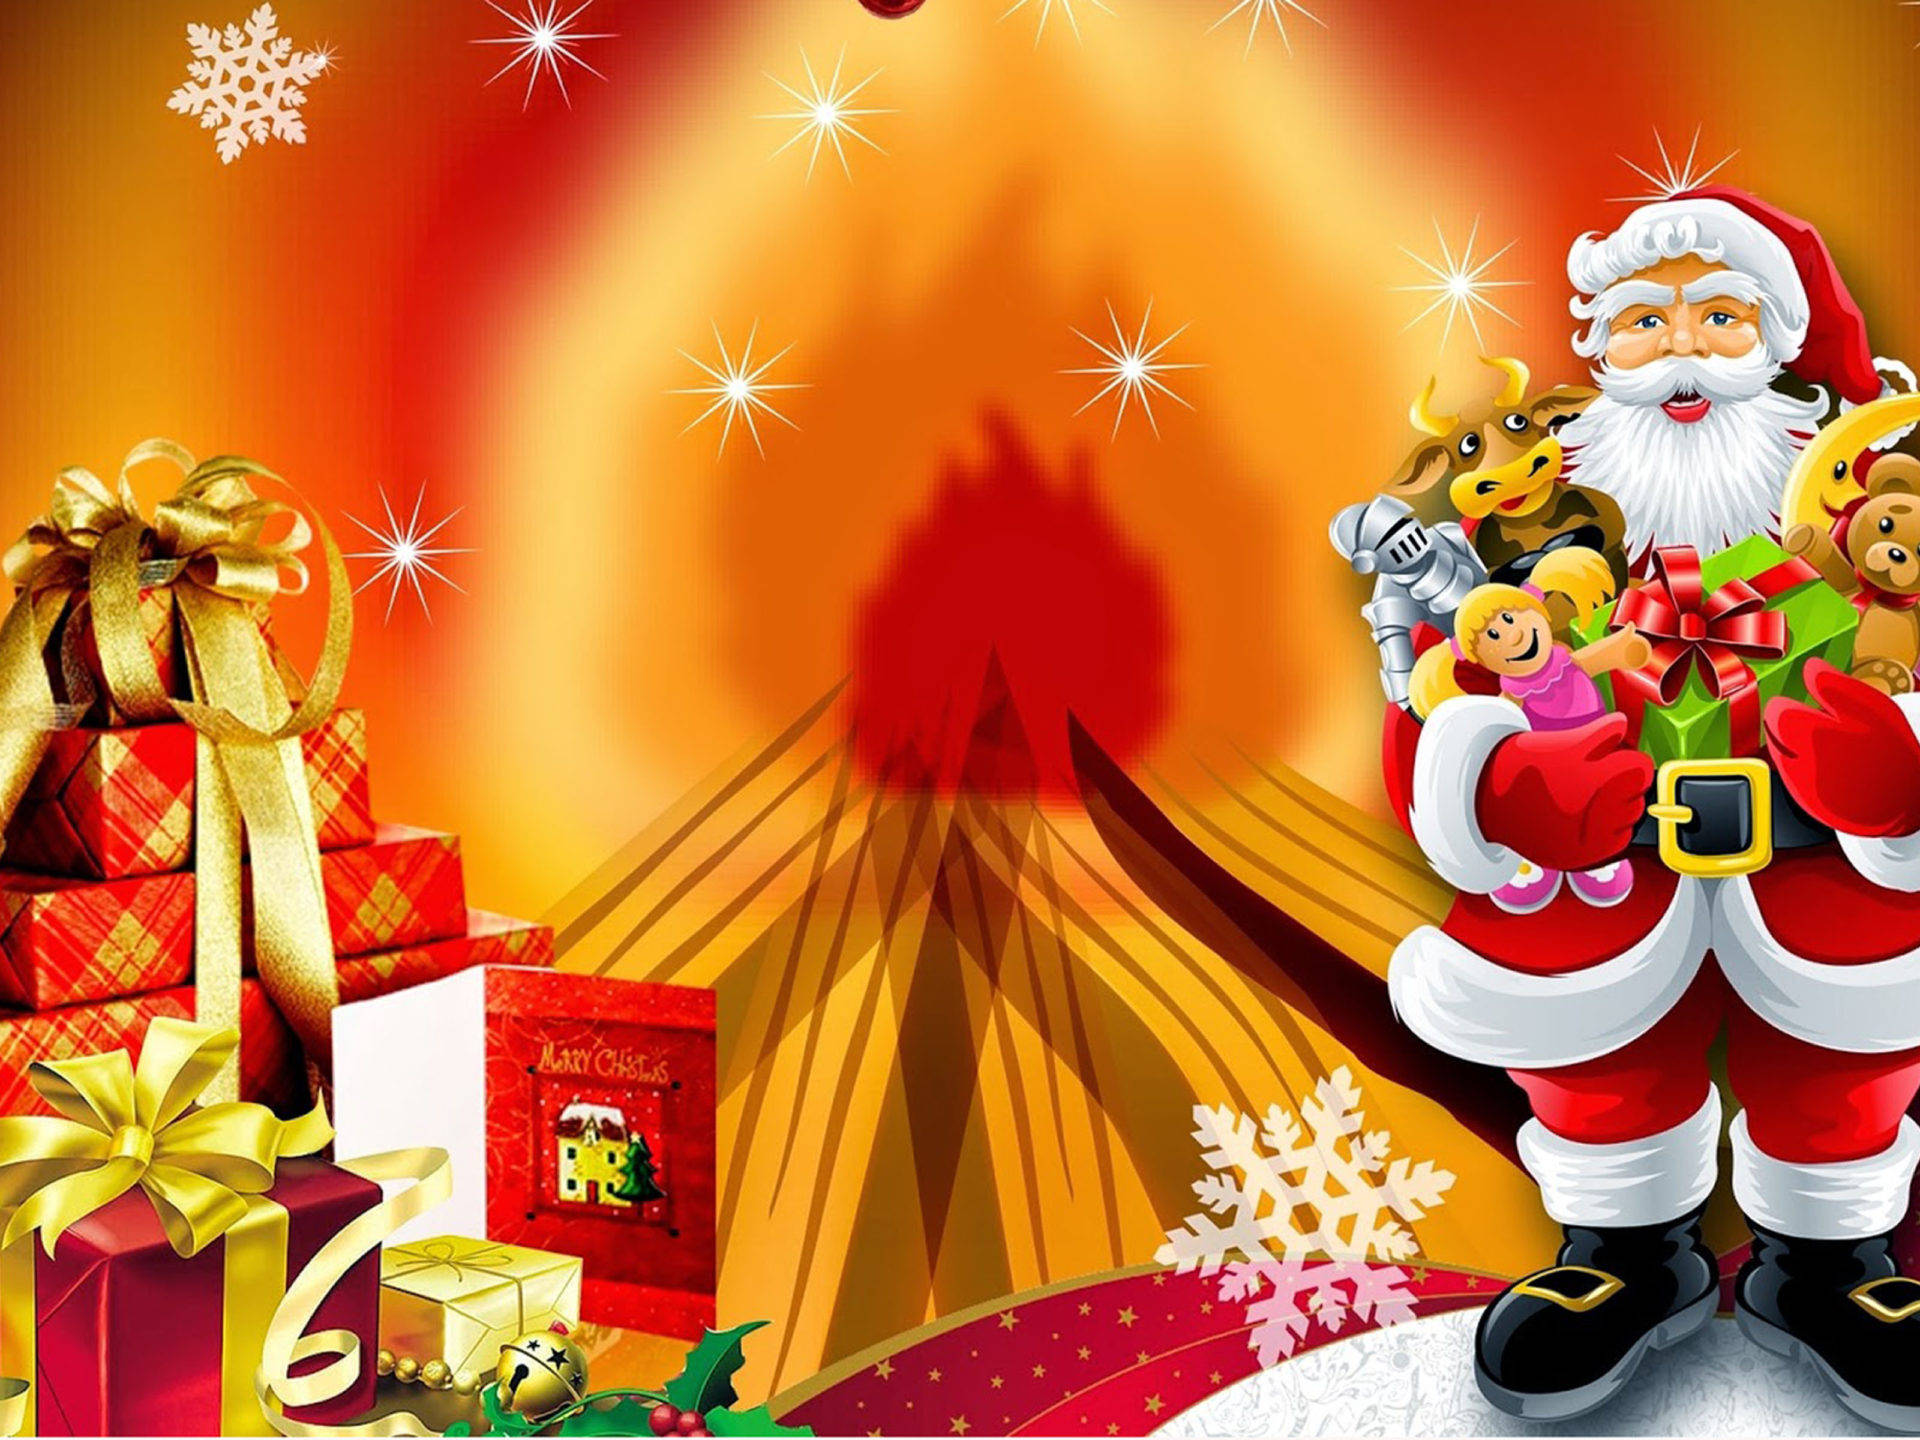 Santa Claus And Christmas Presents Background